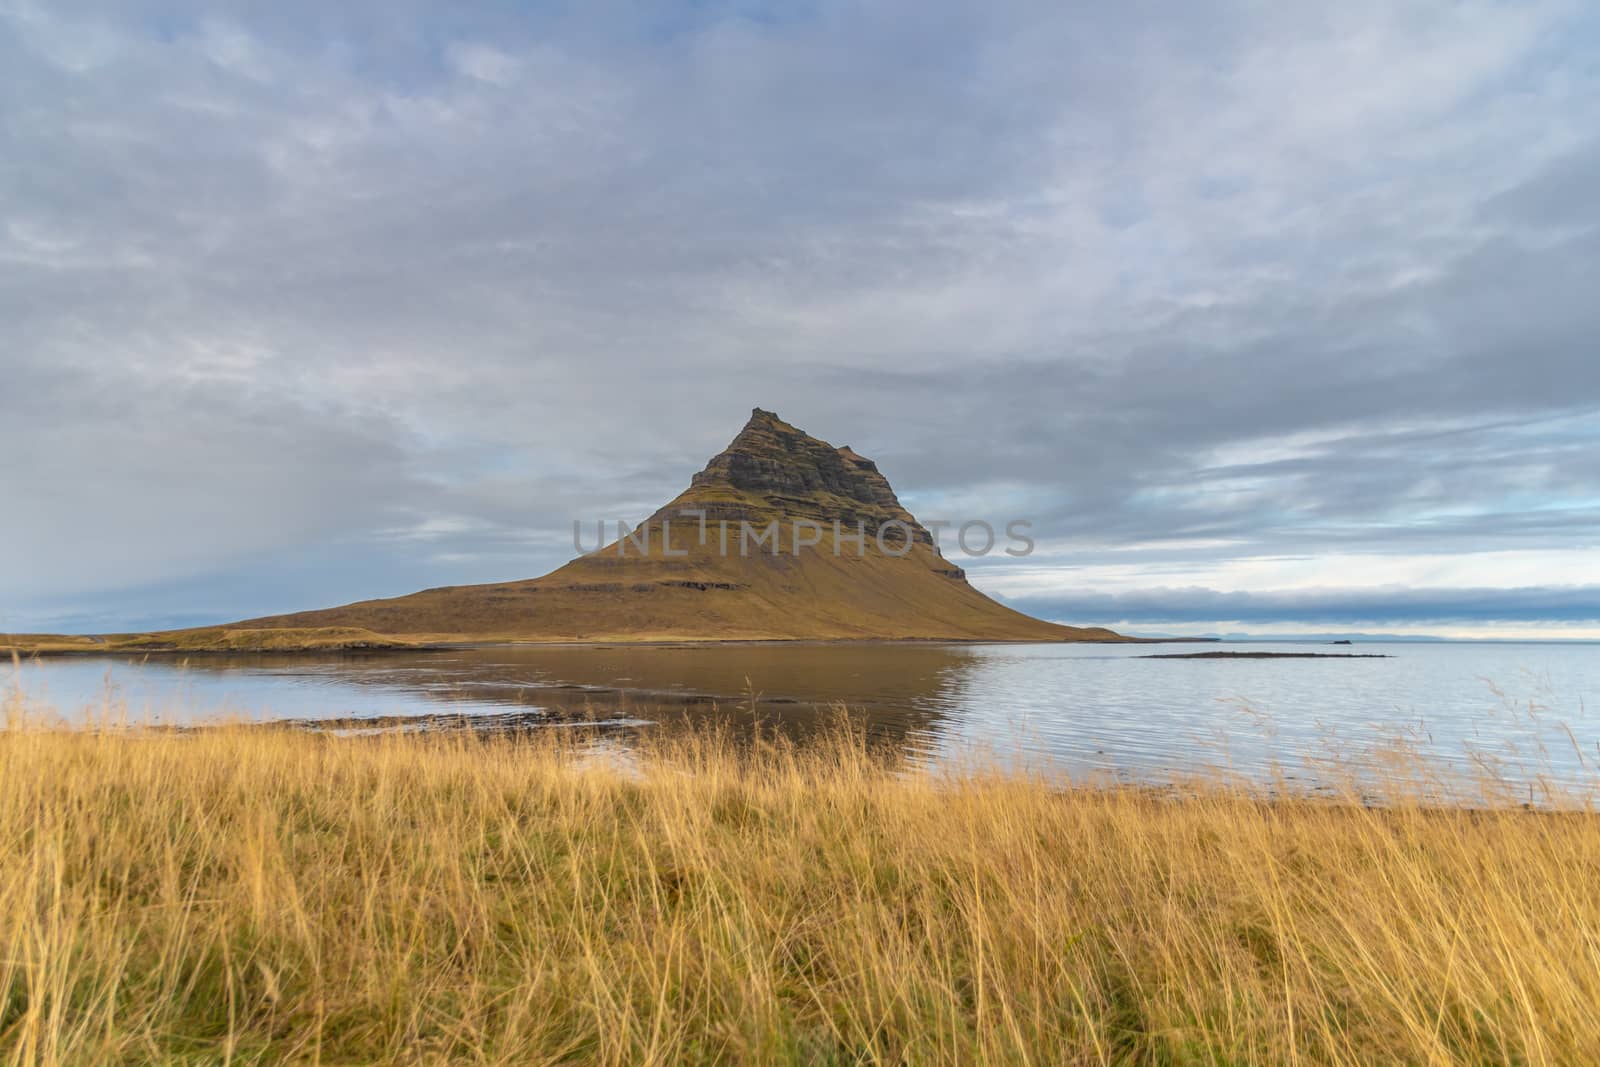 Kirkjufell in Iceland famous mountain reflecting in flat lake during stormy day